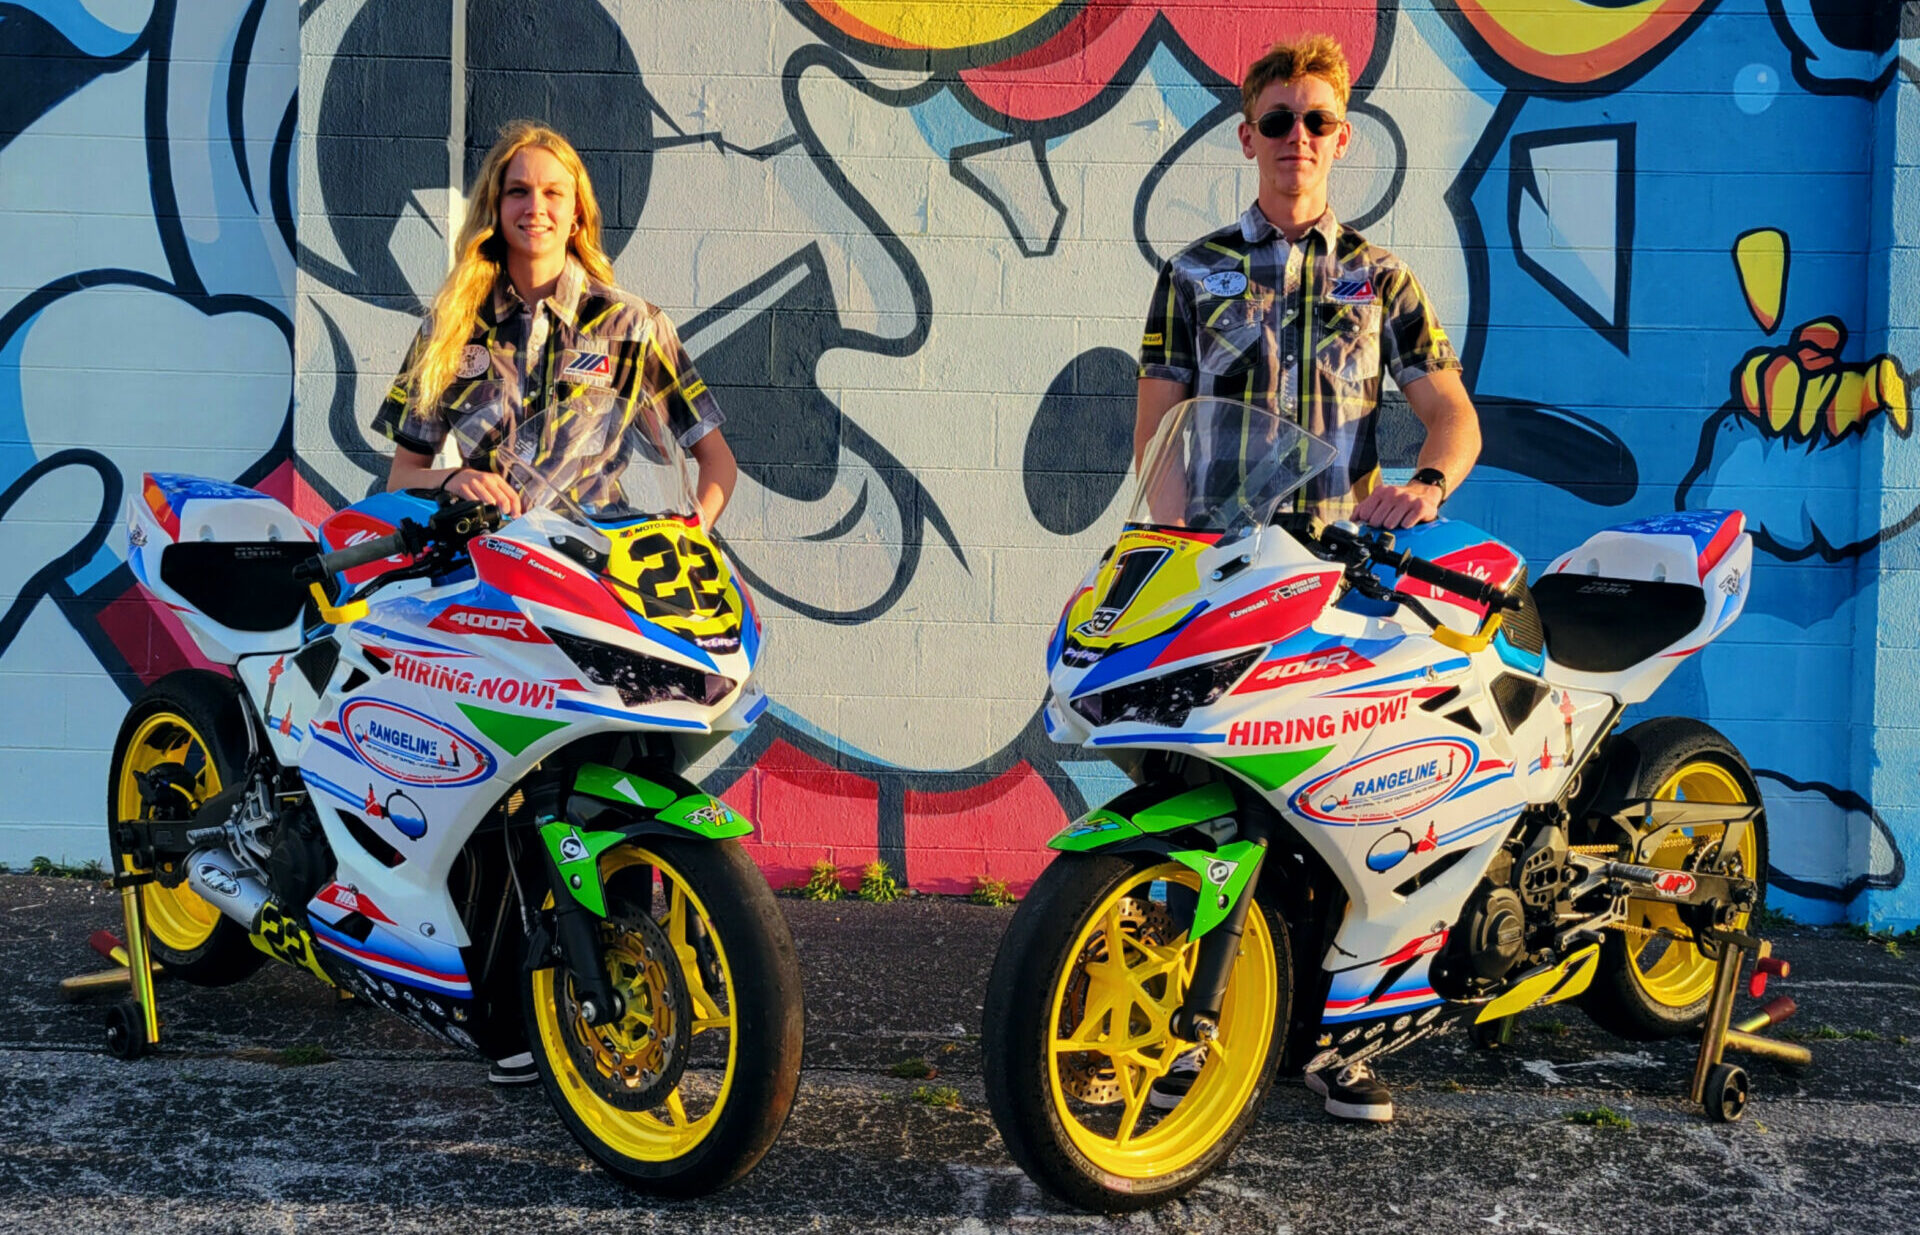 Defending MotoAmerica Junior Cup Champion Avery Dreher (right) and his younger sister Ella Dreher (left). Photo courtesy Bad Boys Racing.